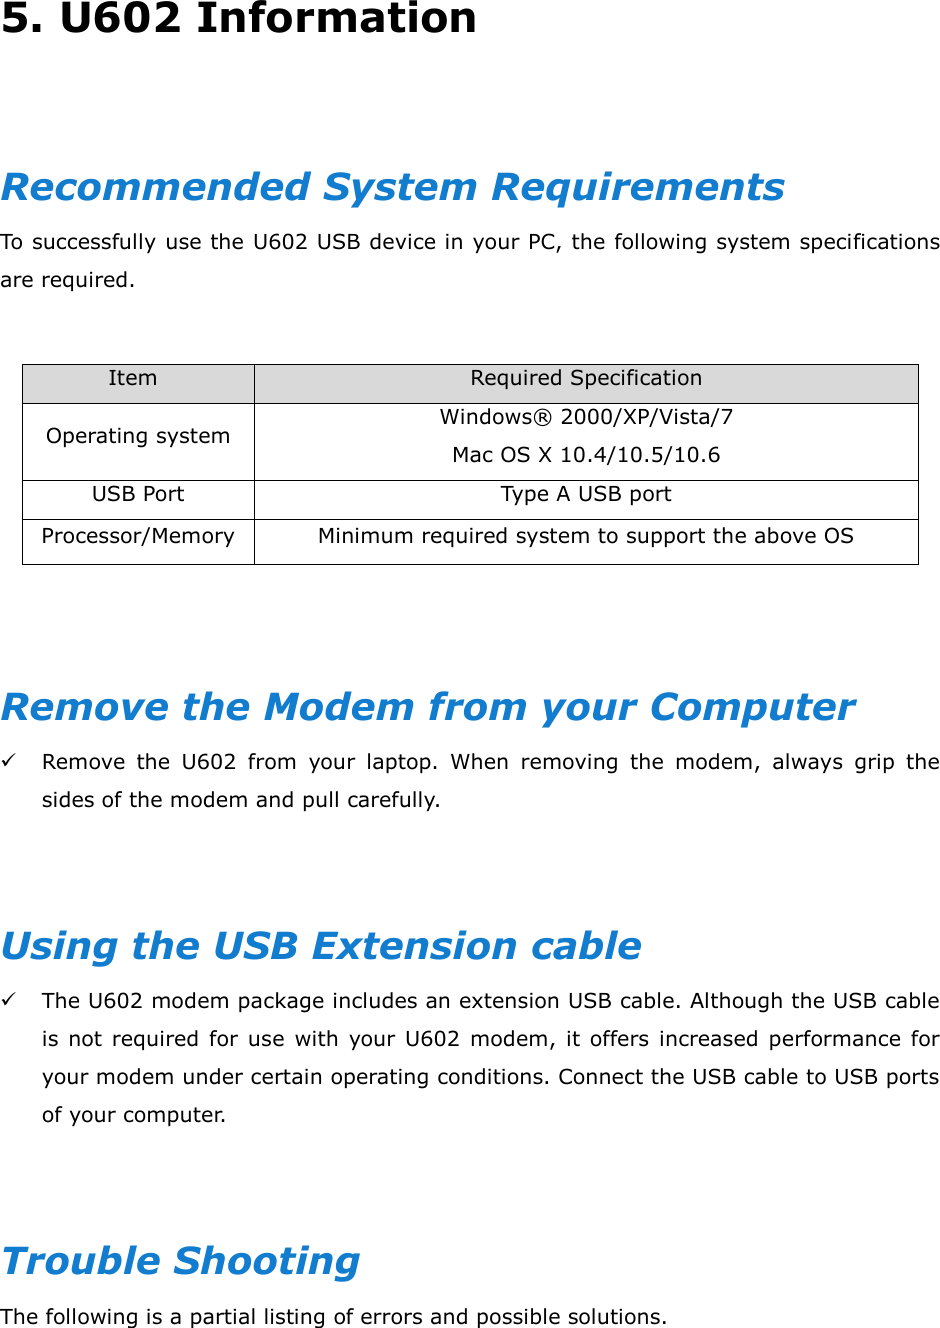 5. U602 Information    Recommended System Requirements To successfully use the U602 USB device in your PC, the following system specifications are required.  Item                            Required Specification Operating system Windows®  2000/XP/Vista/7 Mac OS X 10.4/10.5/10.6 USB Port Type A USB port Processor/Memory Minimum required system to support the above OS   Remove the Modem from your Computer  Remove  the  U602  from  your  laptop.  When  removing  the  modem,  always  grip  the sides of the modem and pull carefully.   Using the USB Extension cable  The U602 modem package includes an extension USB cable. Although the USB cable is  not  required  for use  with  your  U602 modem, it  offers increased performance  for your modem under certain operating conditions. Connect the USB cable to USB ports of your computer.   Trouble Shooting The following is a partial listing of errors and possible solutions.    